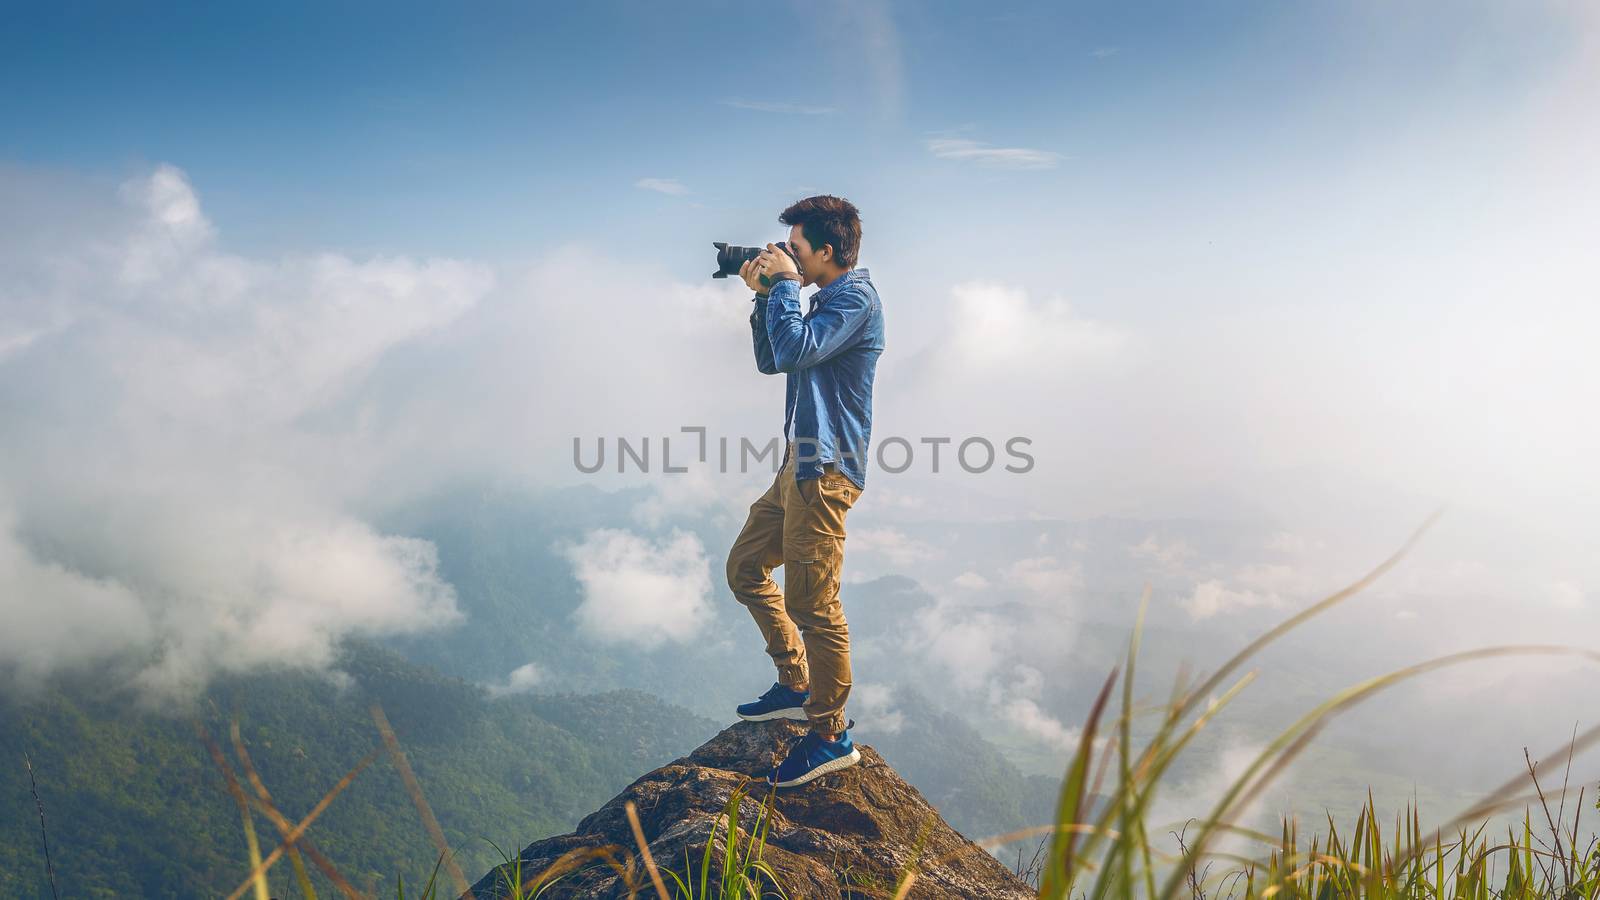 Photographer hand holding camera and standing on top of the rock in nature. Travel concept. Vintage tone.